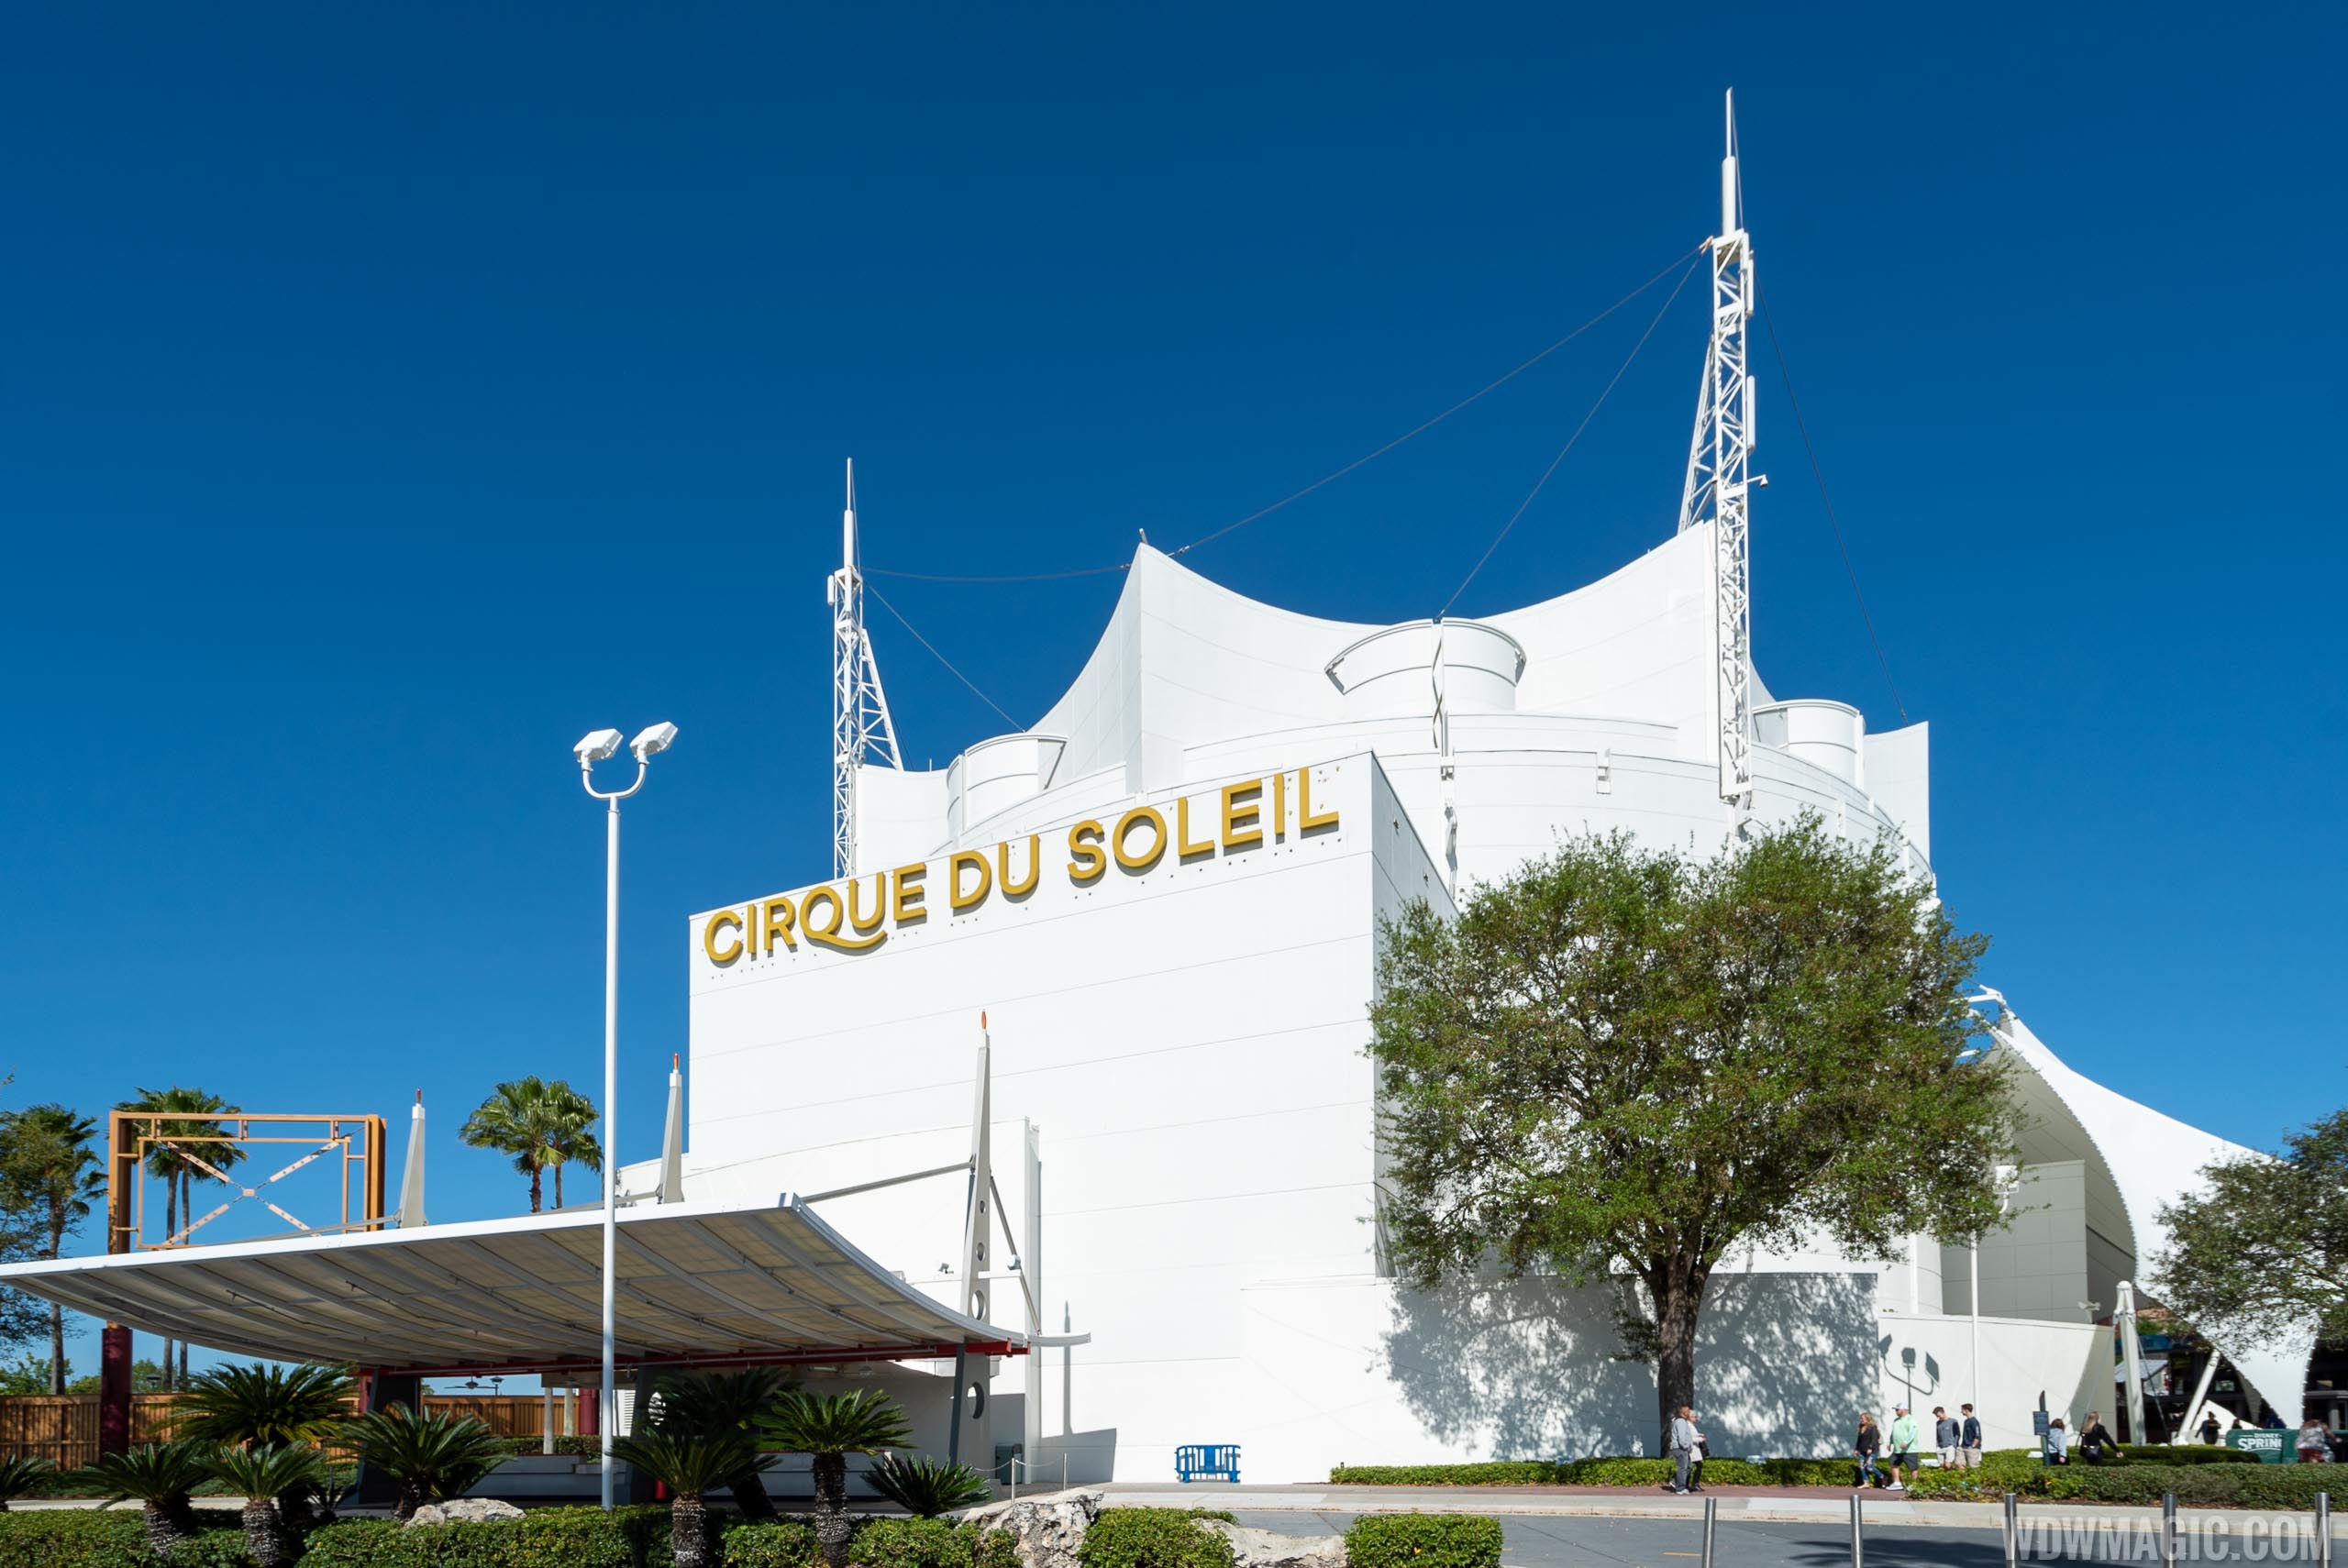 Disney appears to confirm that Cirque du Soleil’s Drawn to Life will debut at Disney Springs in 2021